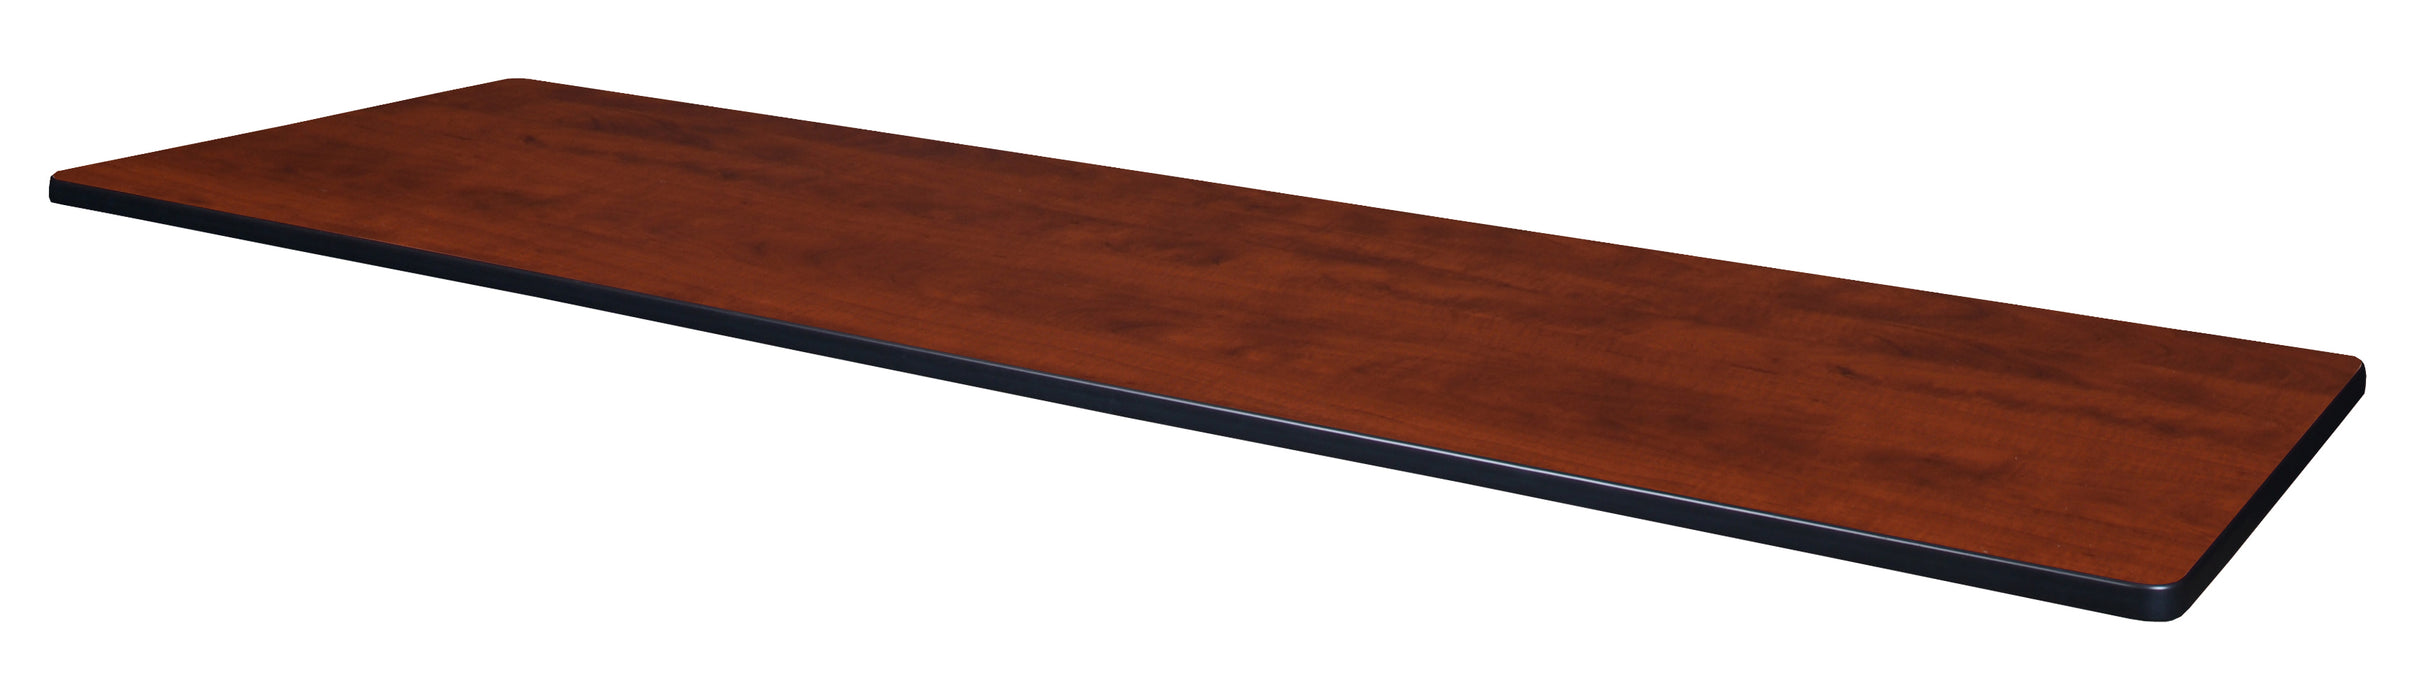 Regency 84 x 24 in Rectangle Laminate Double Sided Table Top